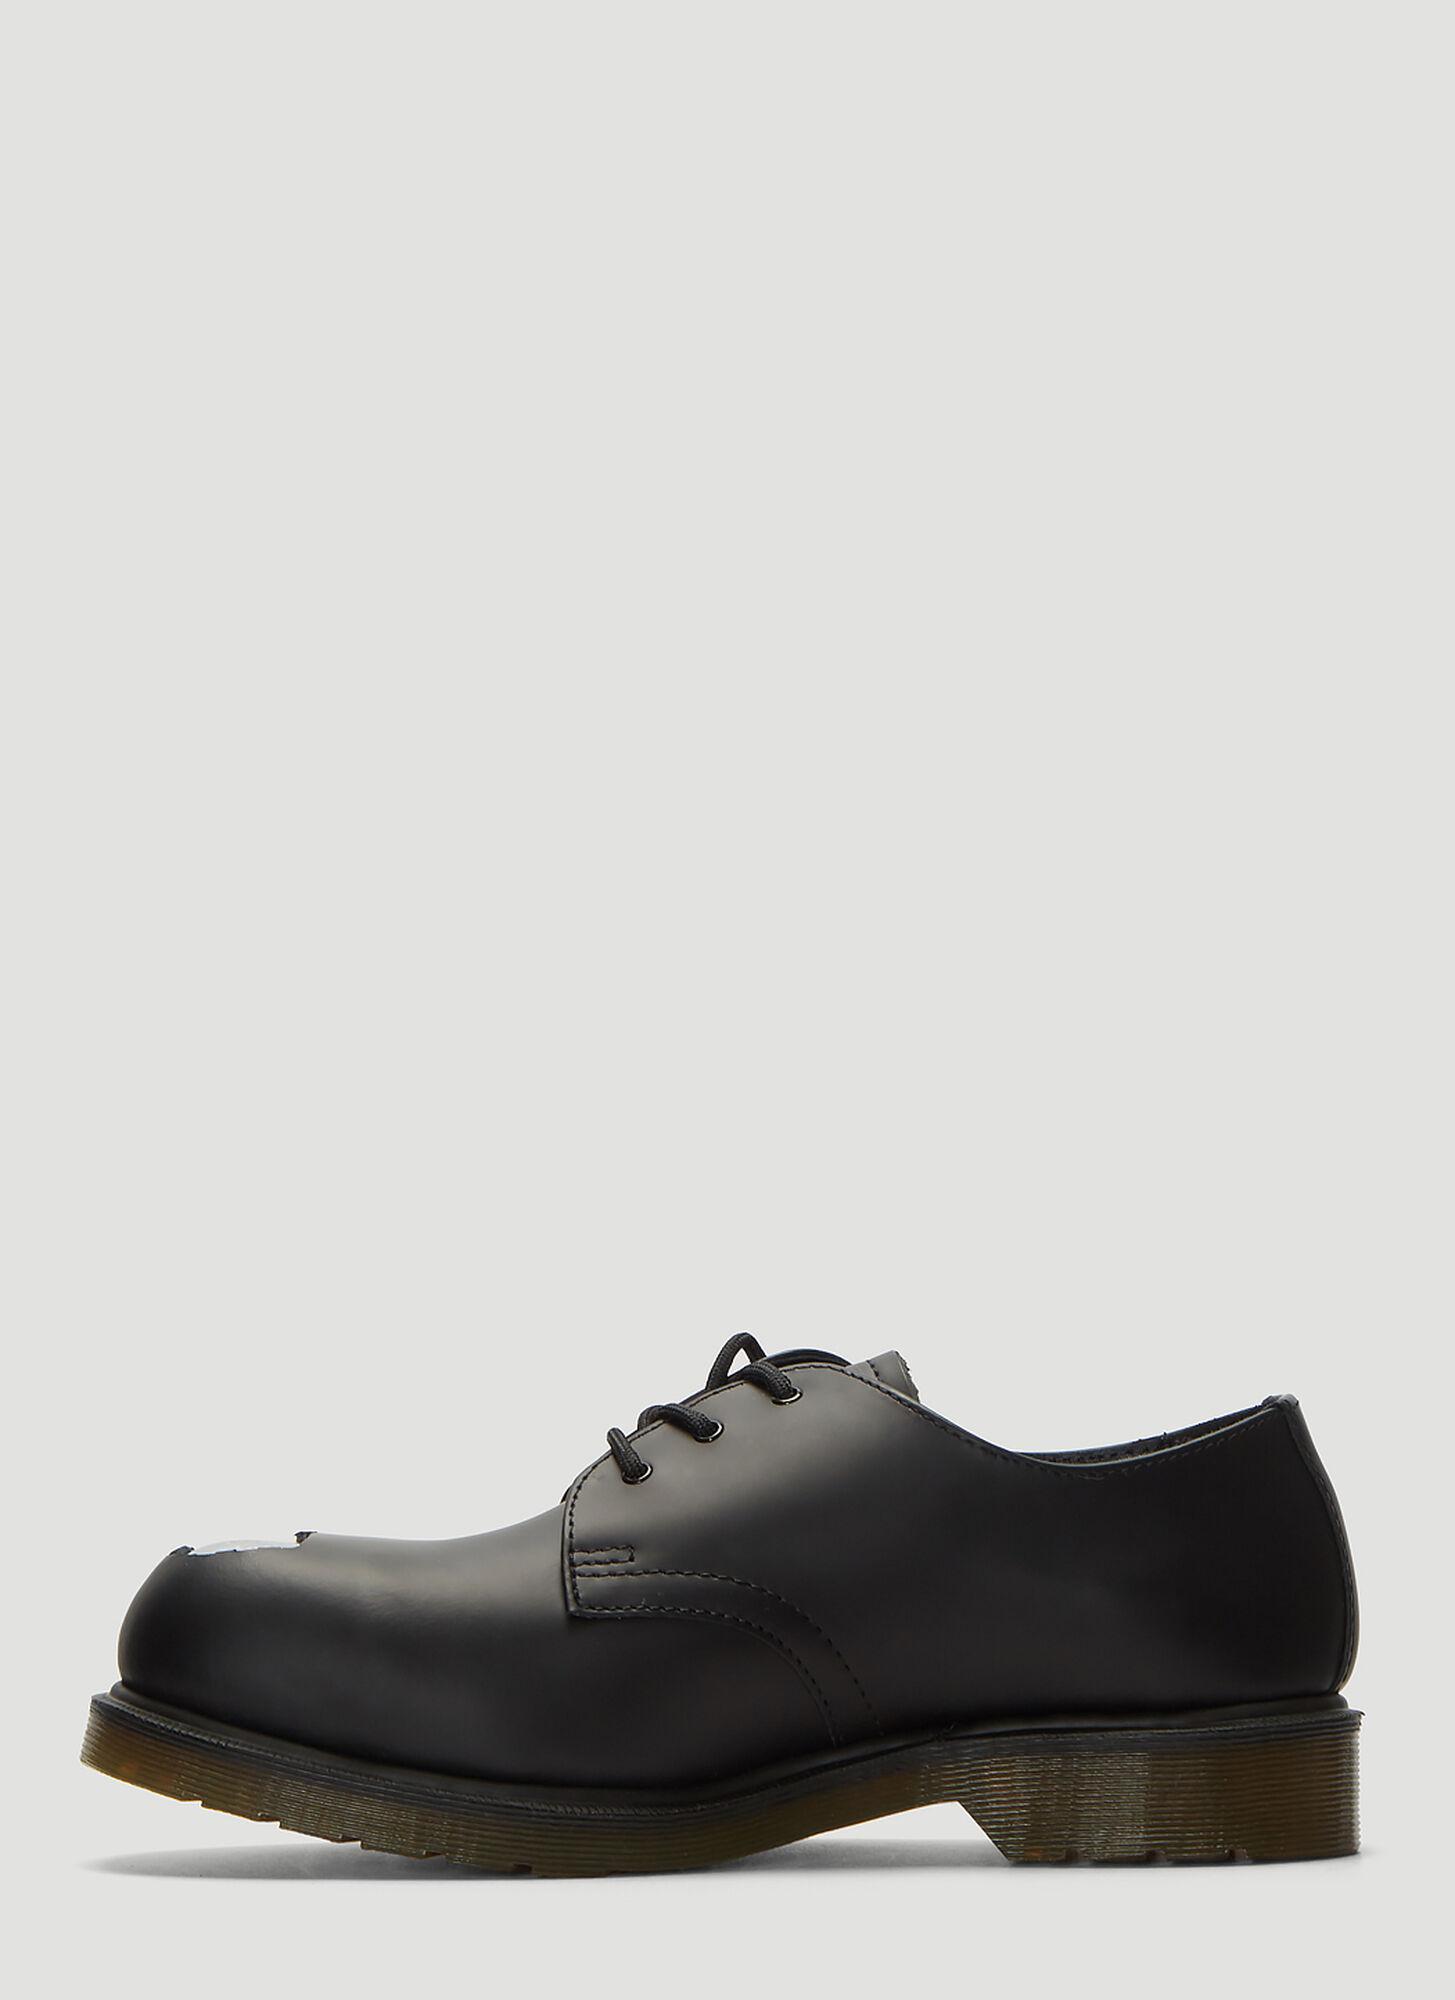 Raf Simons X Dr. Martens Exposed Steel Toe Shoes in Black for Men | Lyst